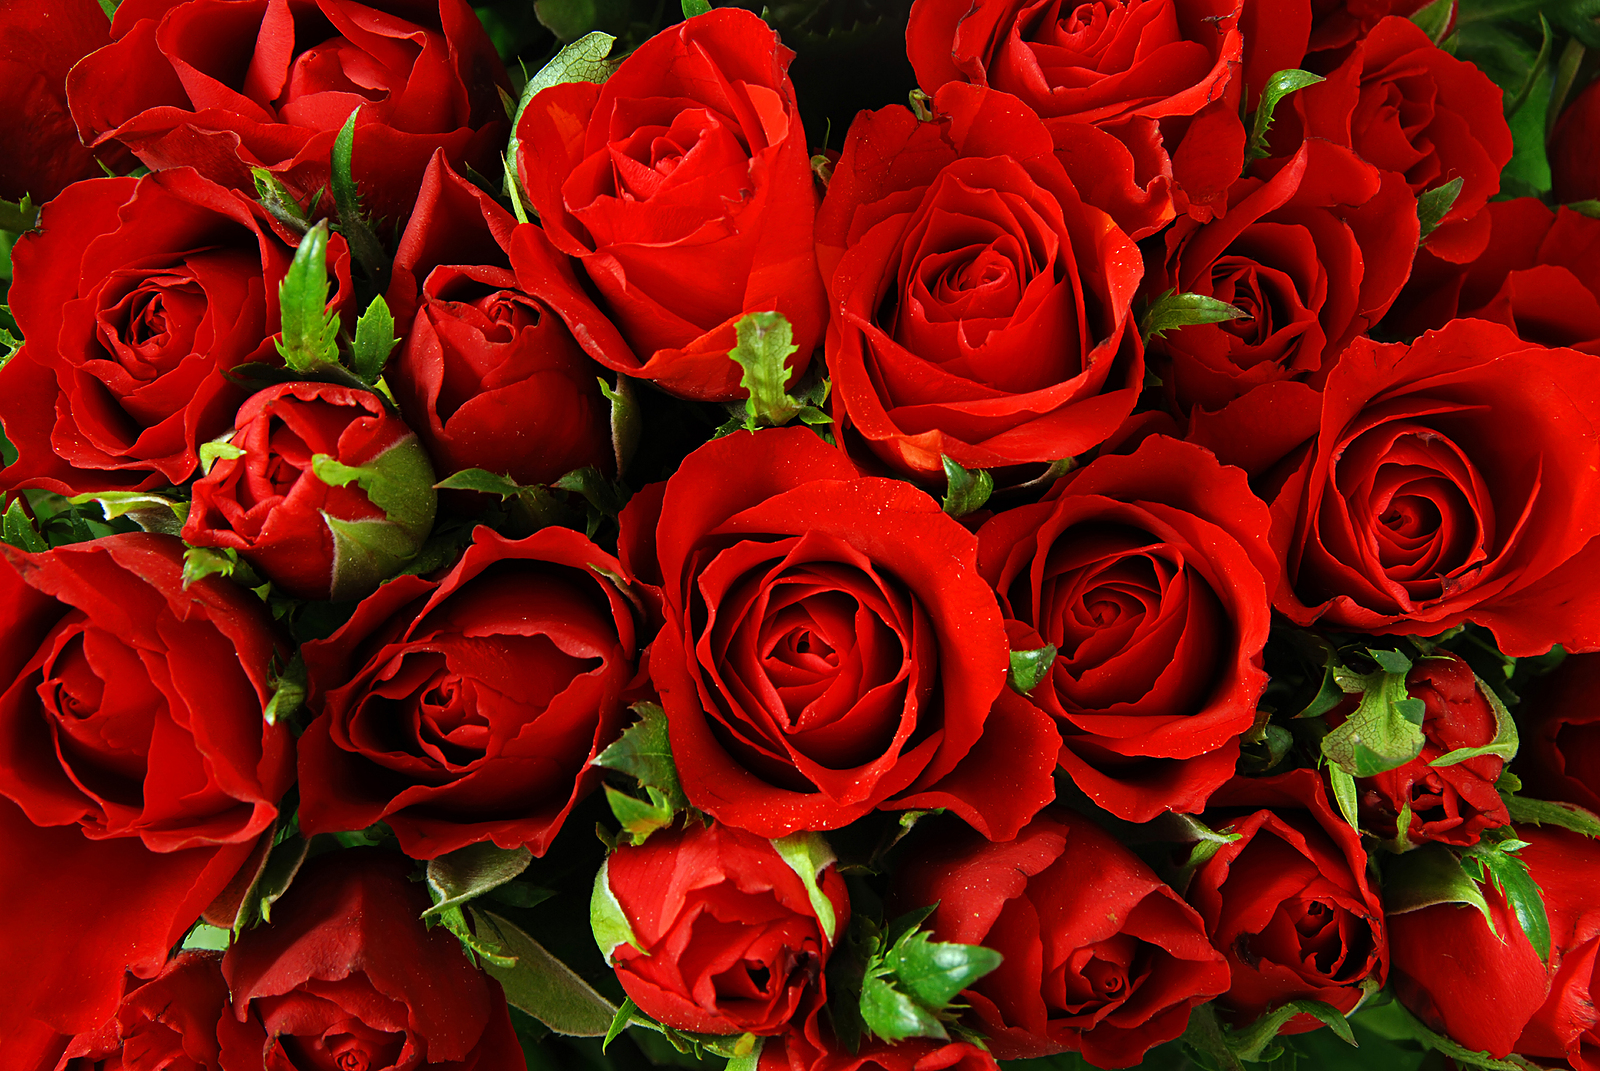  1600 1071 in bigstock Red roses backgroundnatural 25946009 paid